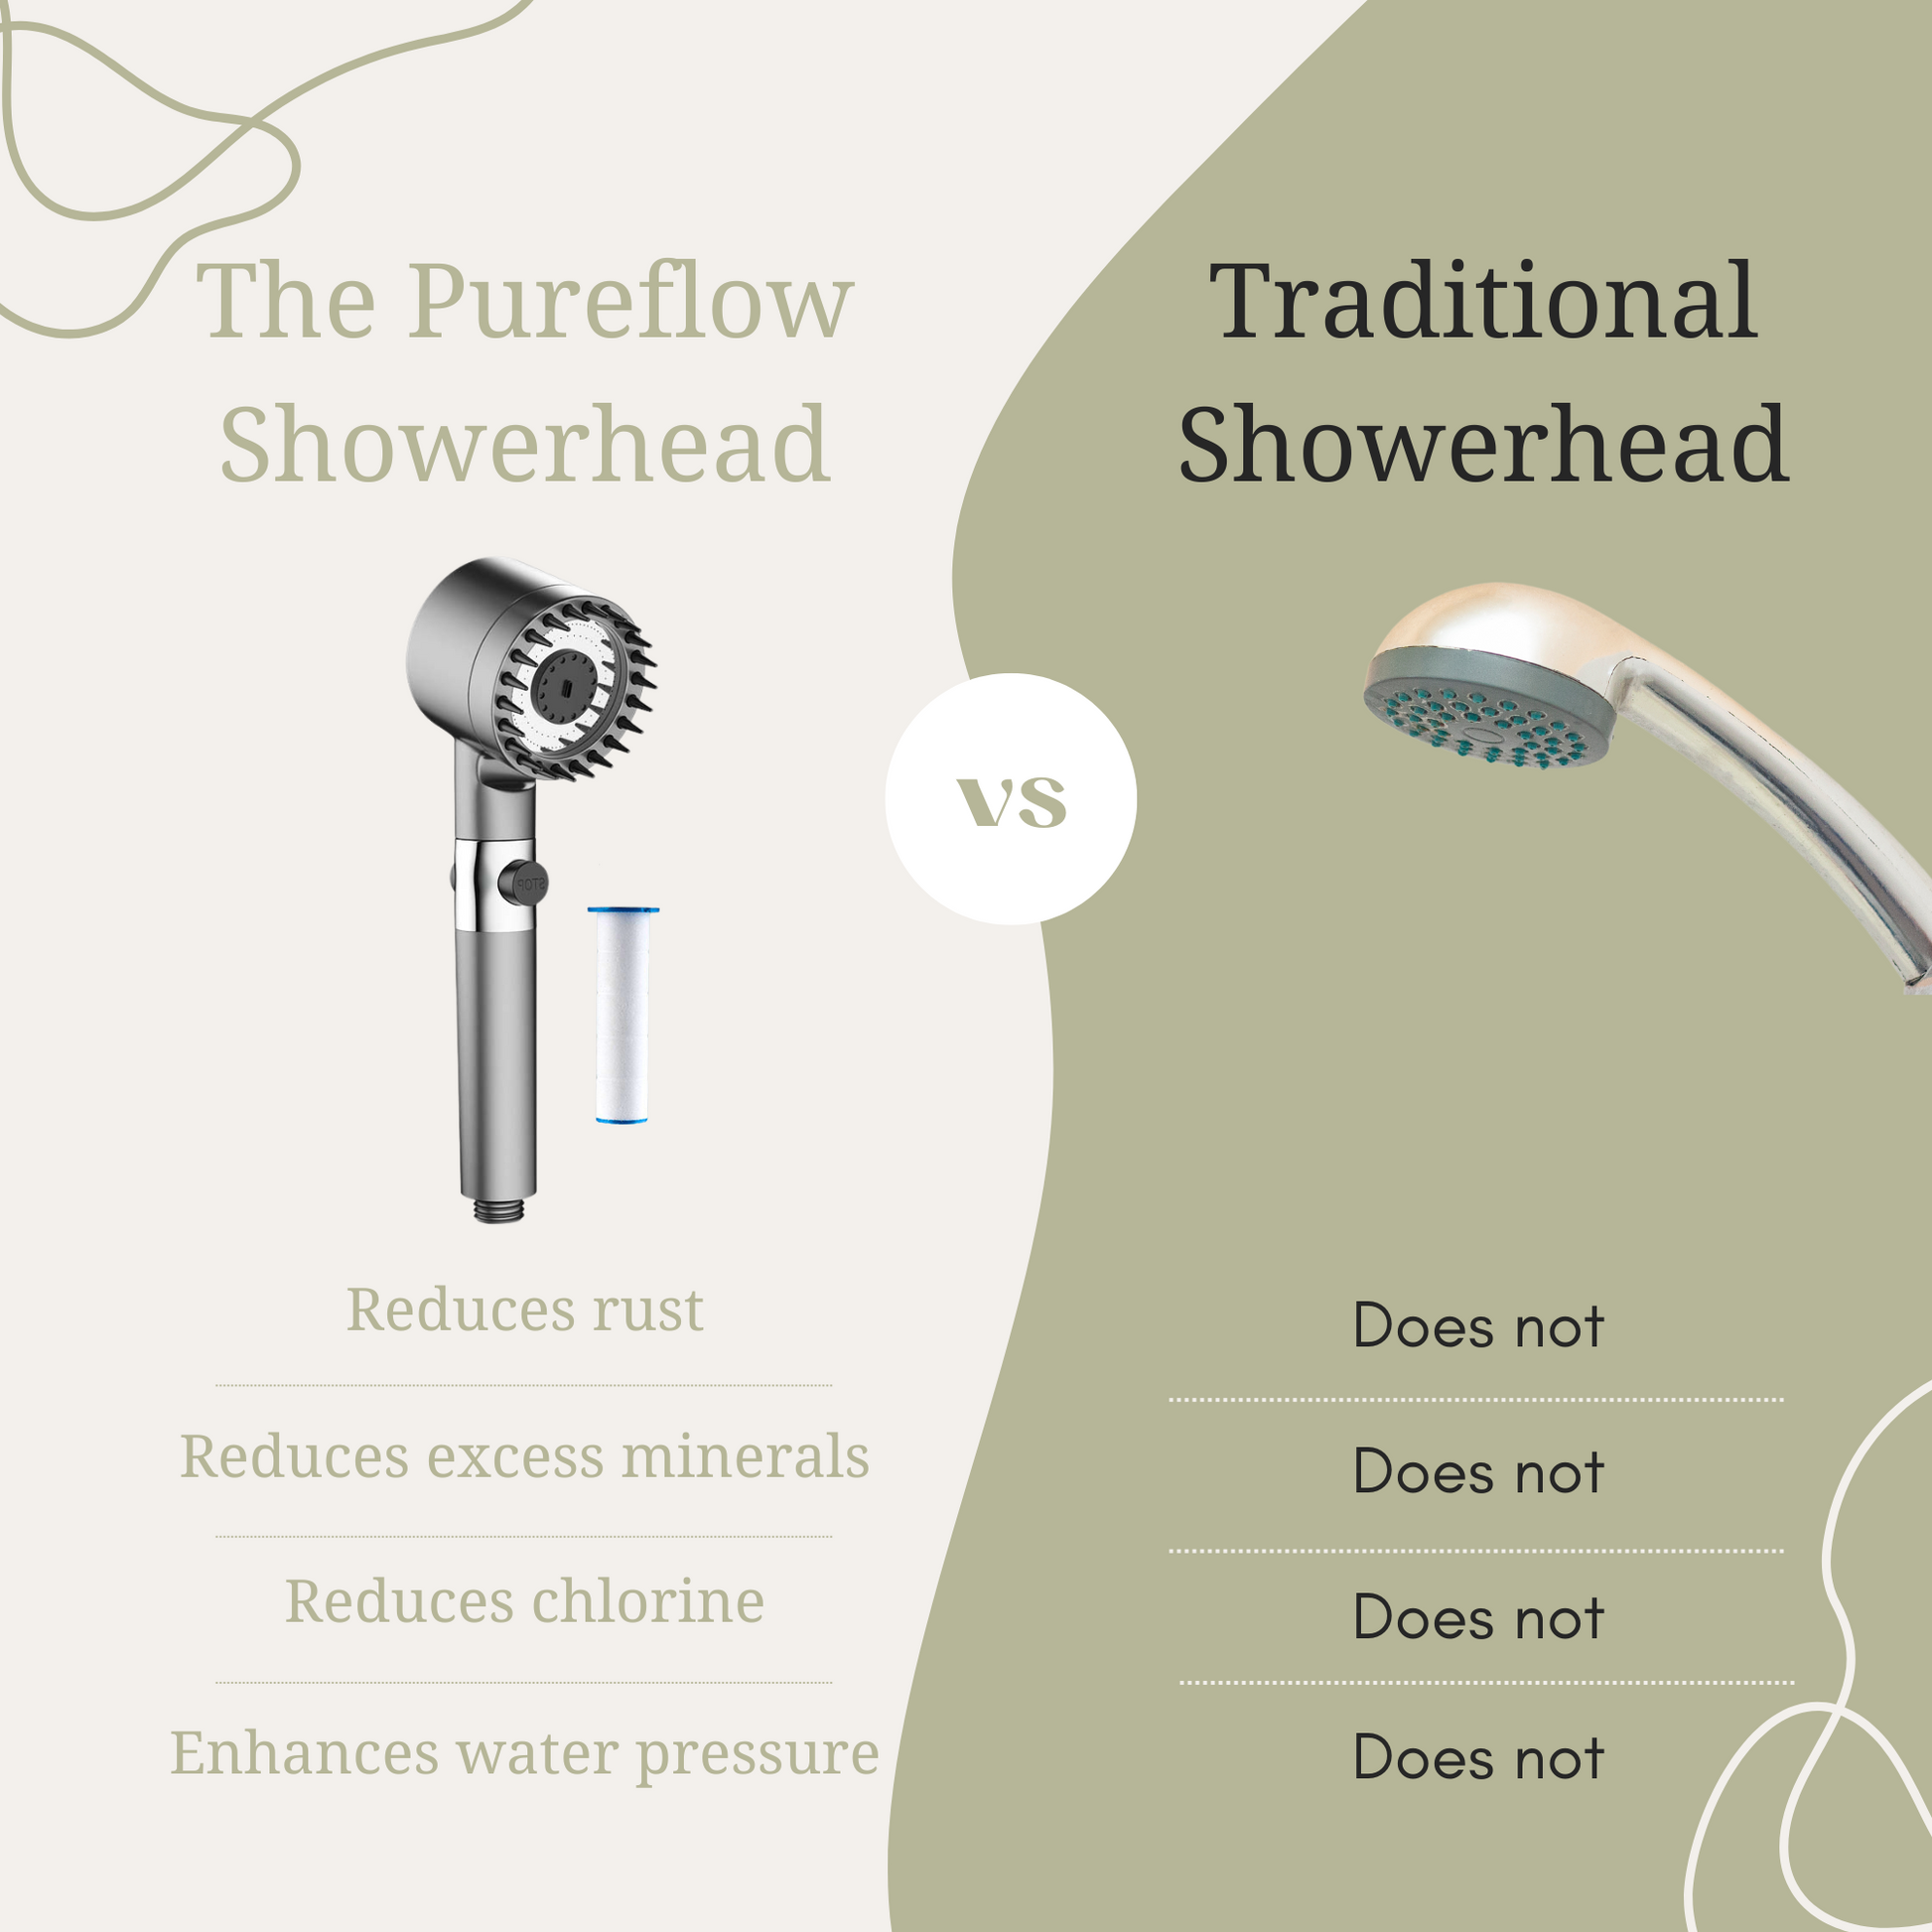 The Pureflow Filtration Showerhead - VANQUISITE Every wellness journey begins with pure water. 200% More Water Pressure. 30% Less Water Waste. Improves Hair and Skin Health. 3 Shower Modes tailored to you. Removes Rust and Mineral Deposits. Your Hair and Skin will Love You. Transform Your Skin and Hair to Radiant and Healthy in as Little as 2 Showers, right in your bathroom! shower head Showerhead + 1 filter, Showerhead + holder, Showerhead + holder + hose (150cm), 1 filter